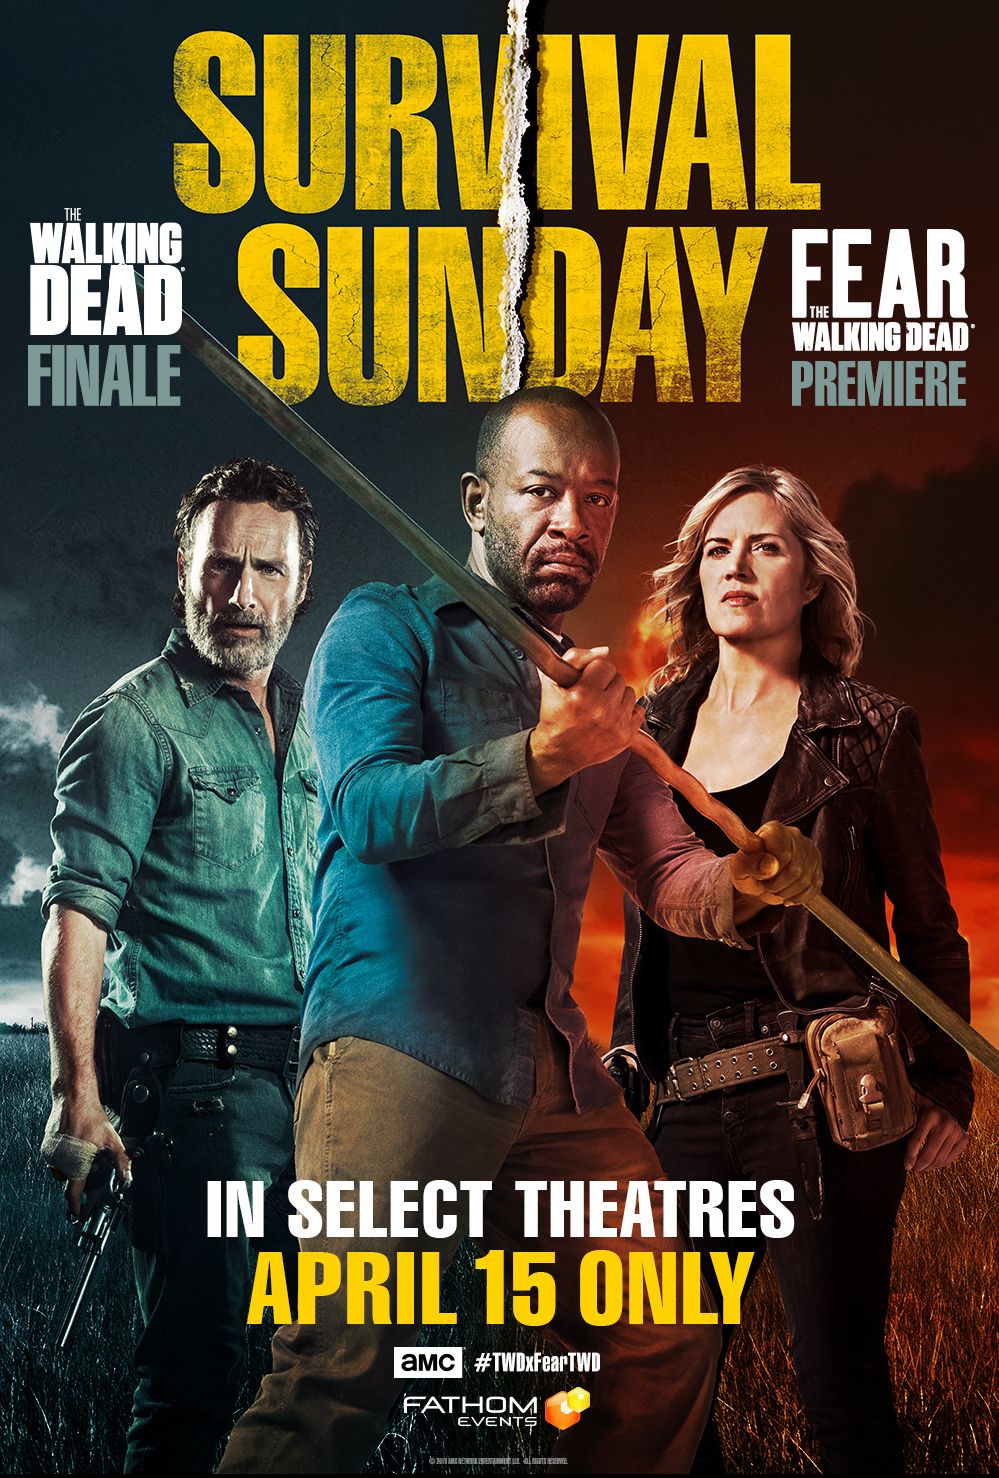 Fear Walking Dead Crossover movie event poster